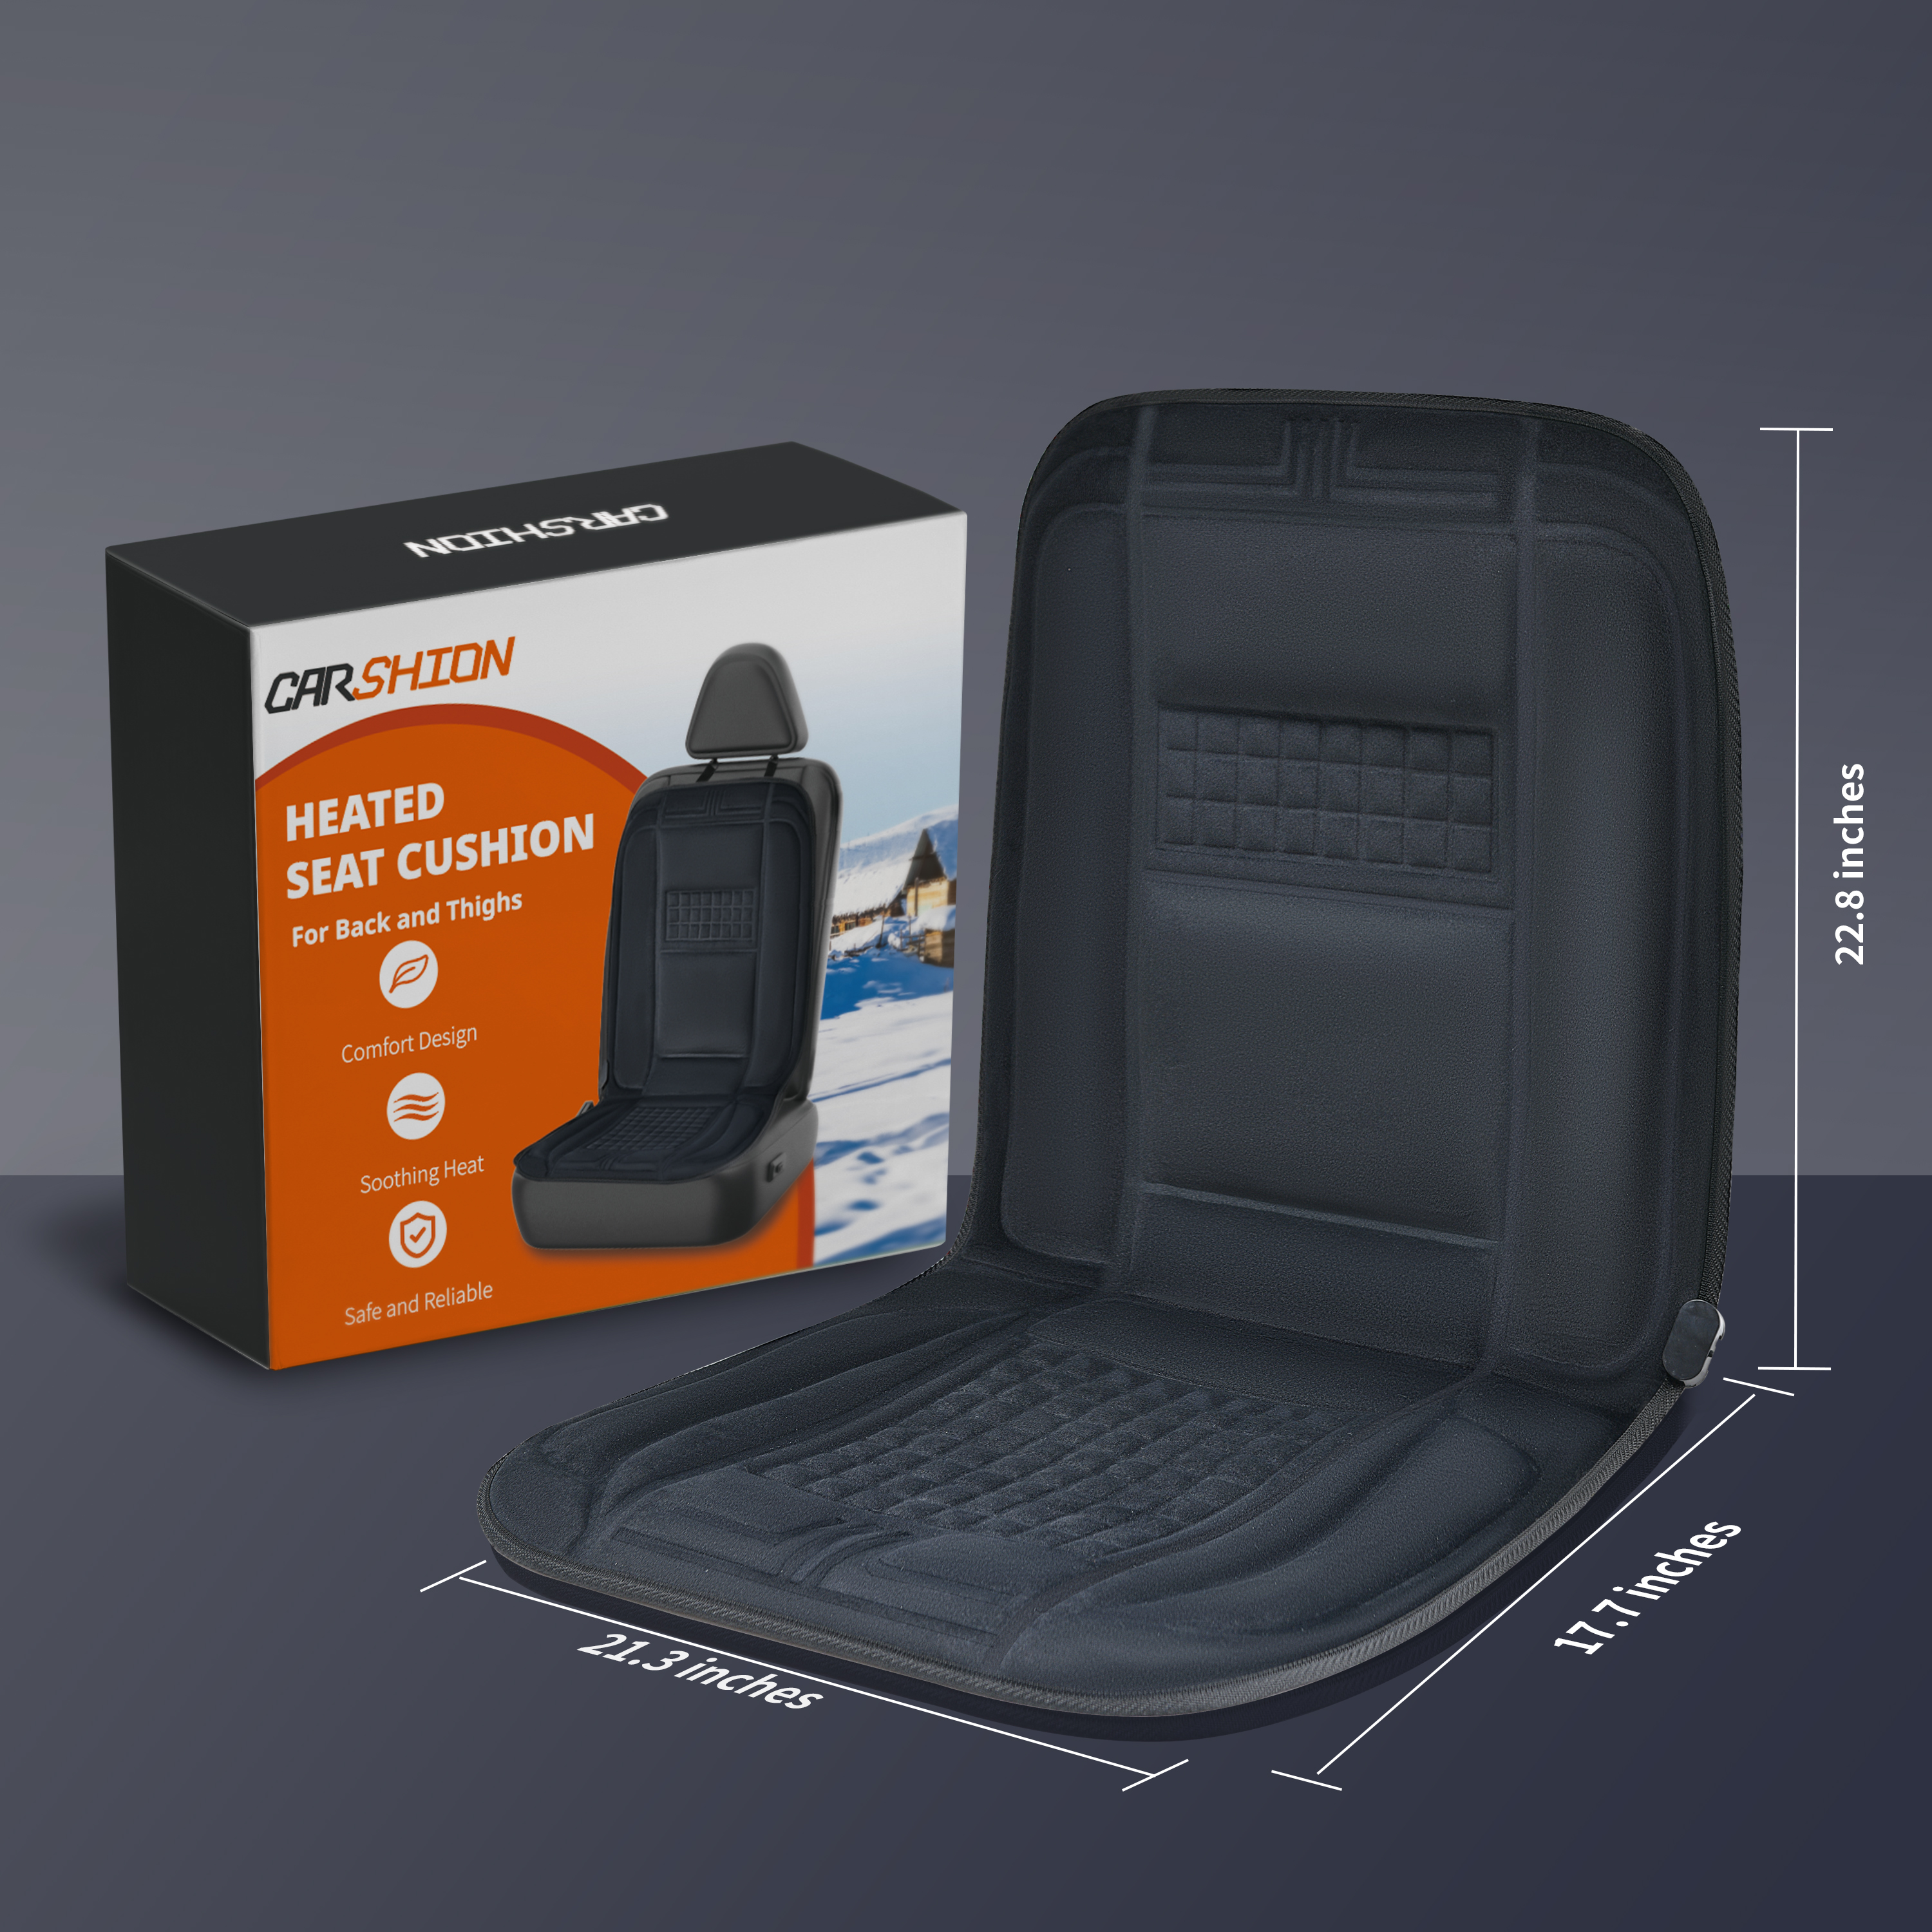 Heated Seat Cover with Fast Heating for Back in Winter